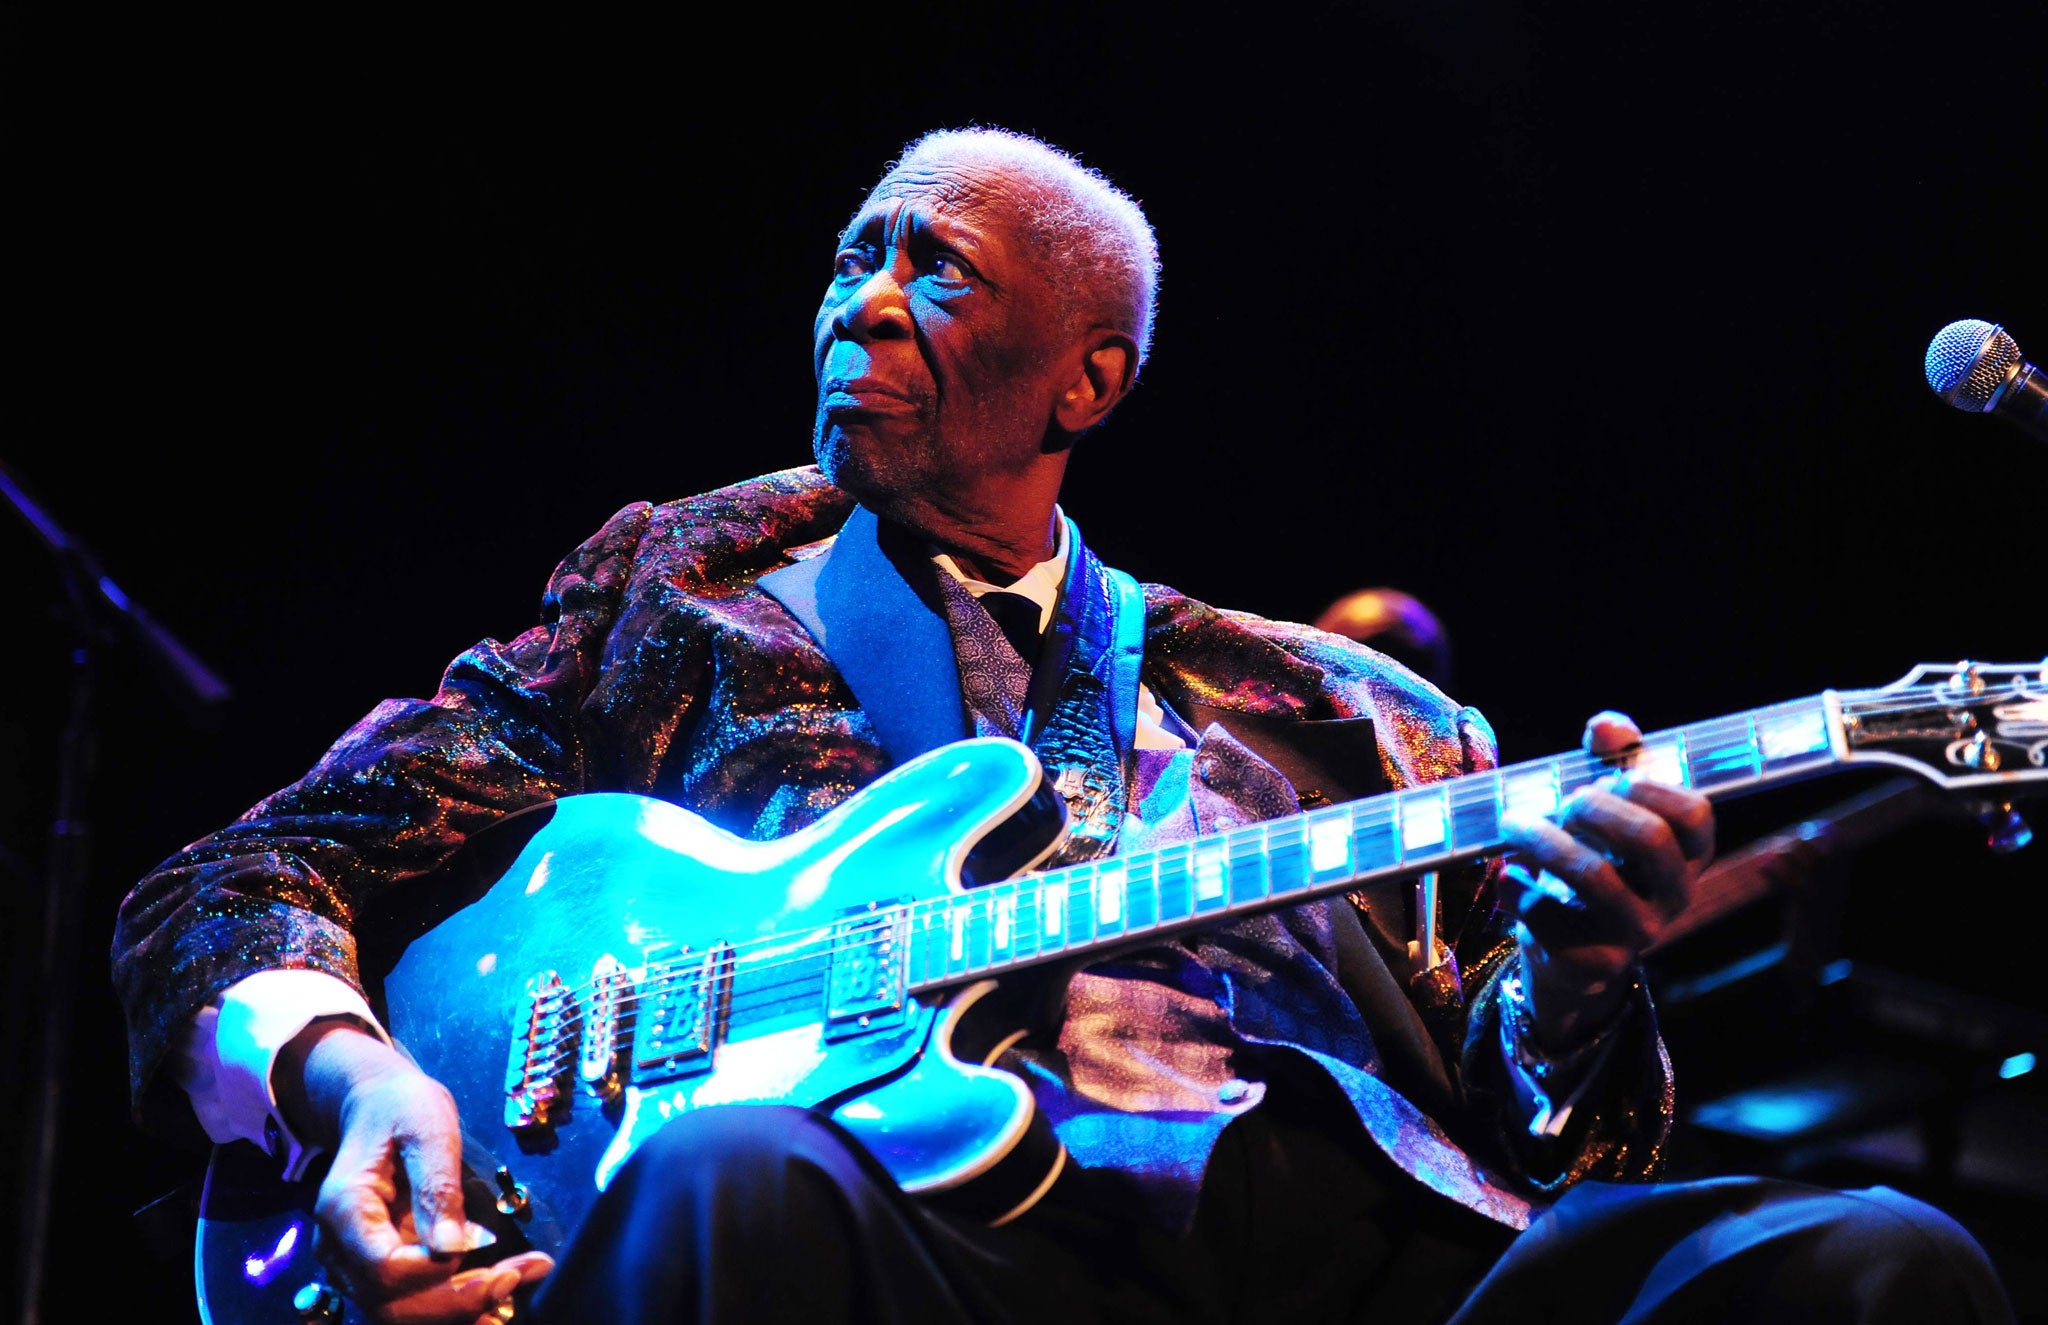 What name did the late blues performer BB King give to his guitar?